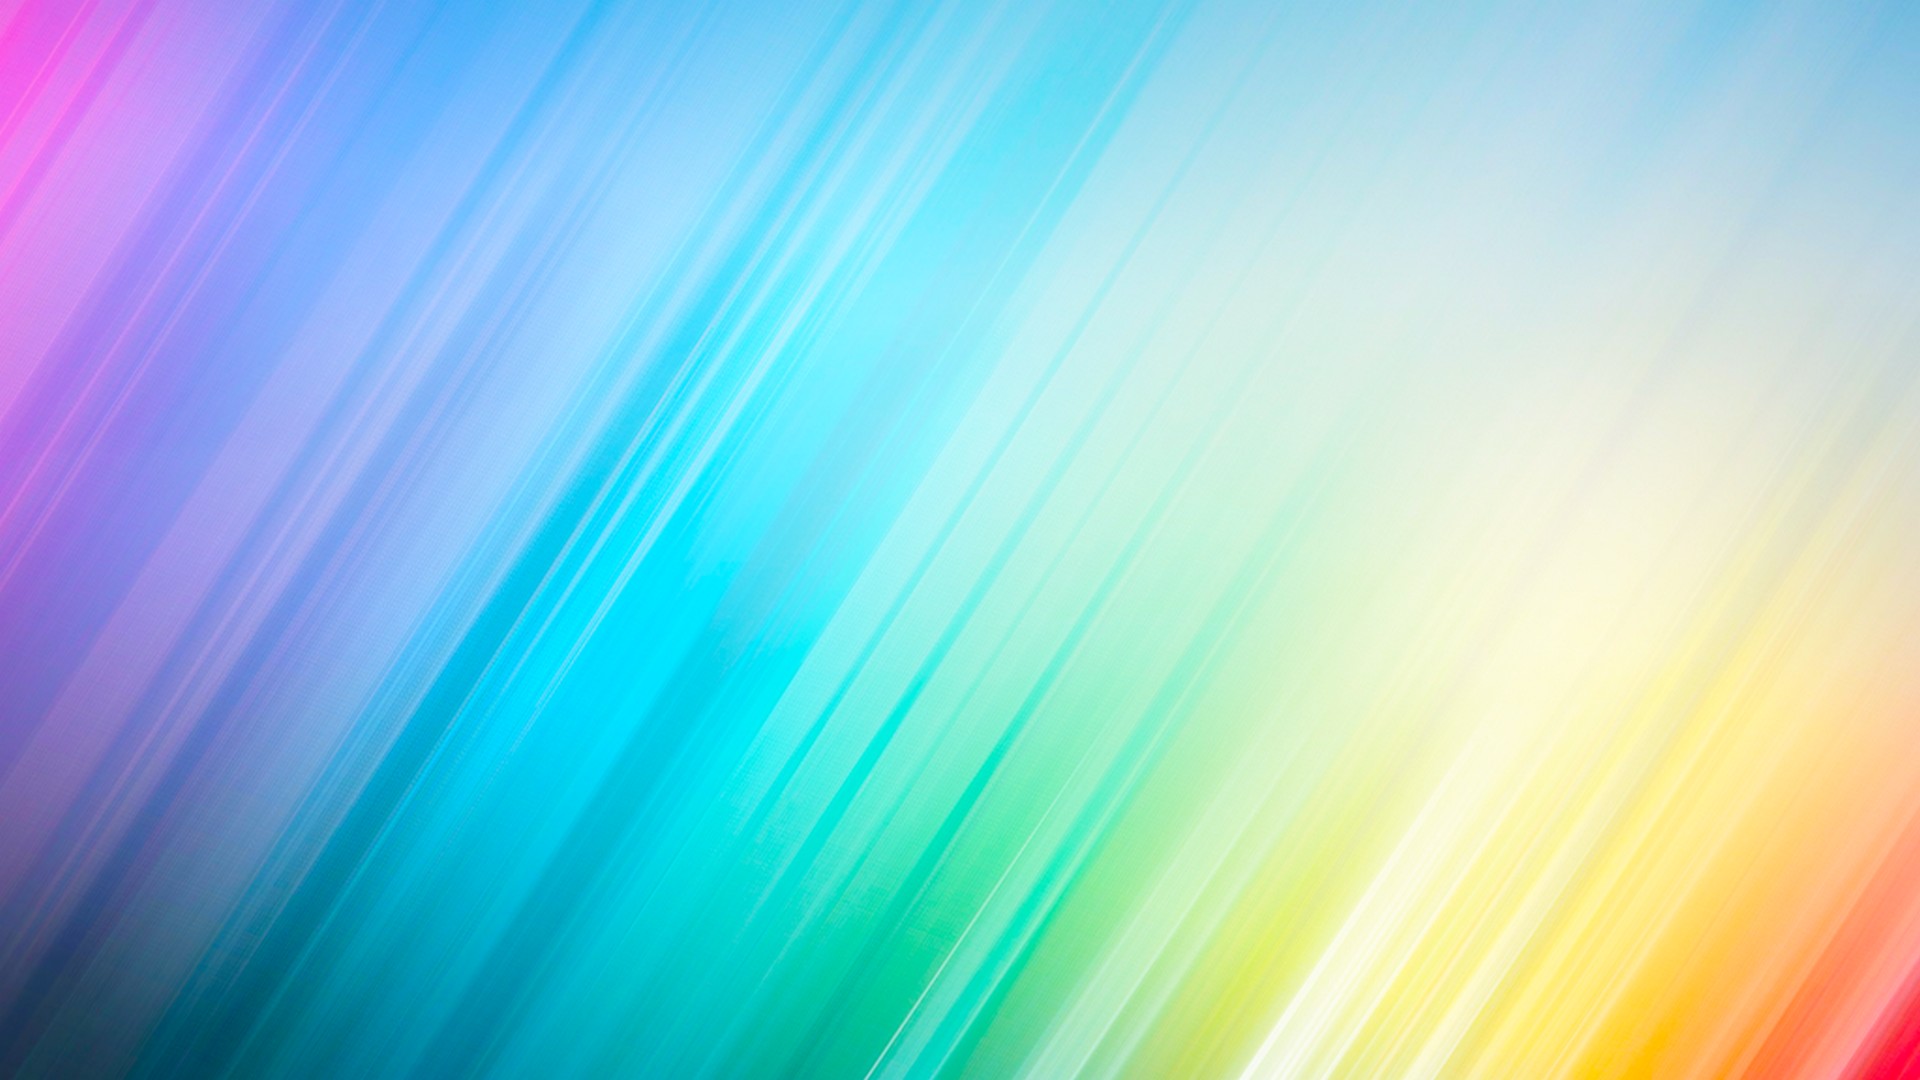 Light Colorful HD Wallpaper with high-resolution 1920x1080 pixel. You can use this wallpaper for your Desktop Computer Backgrounds, Mac Wallpapers, Android Lock screen or iPhone Screensavers and another smartphone device